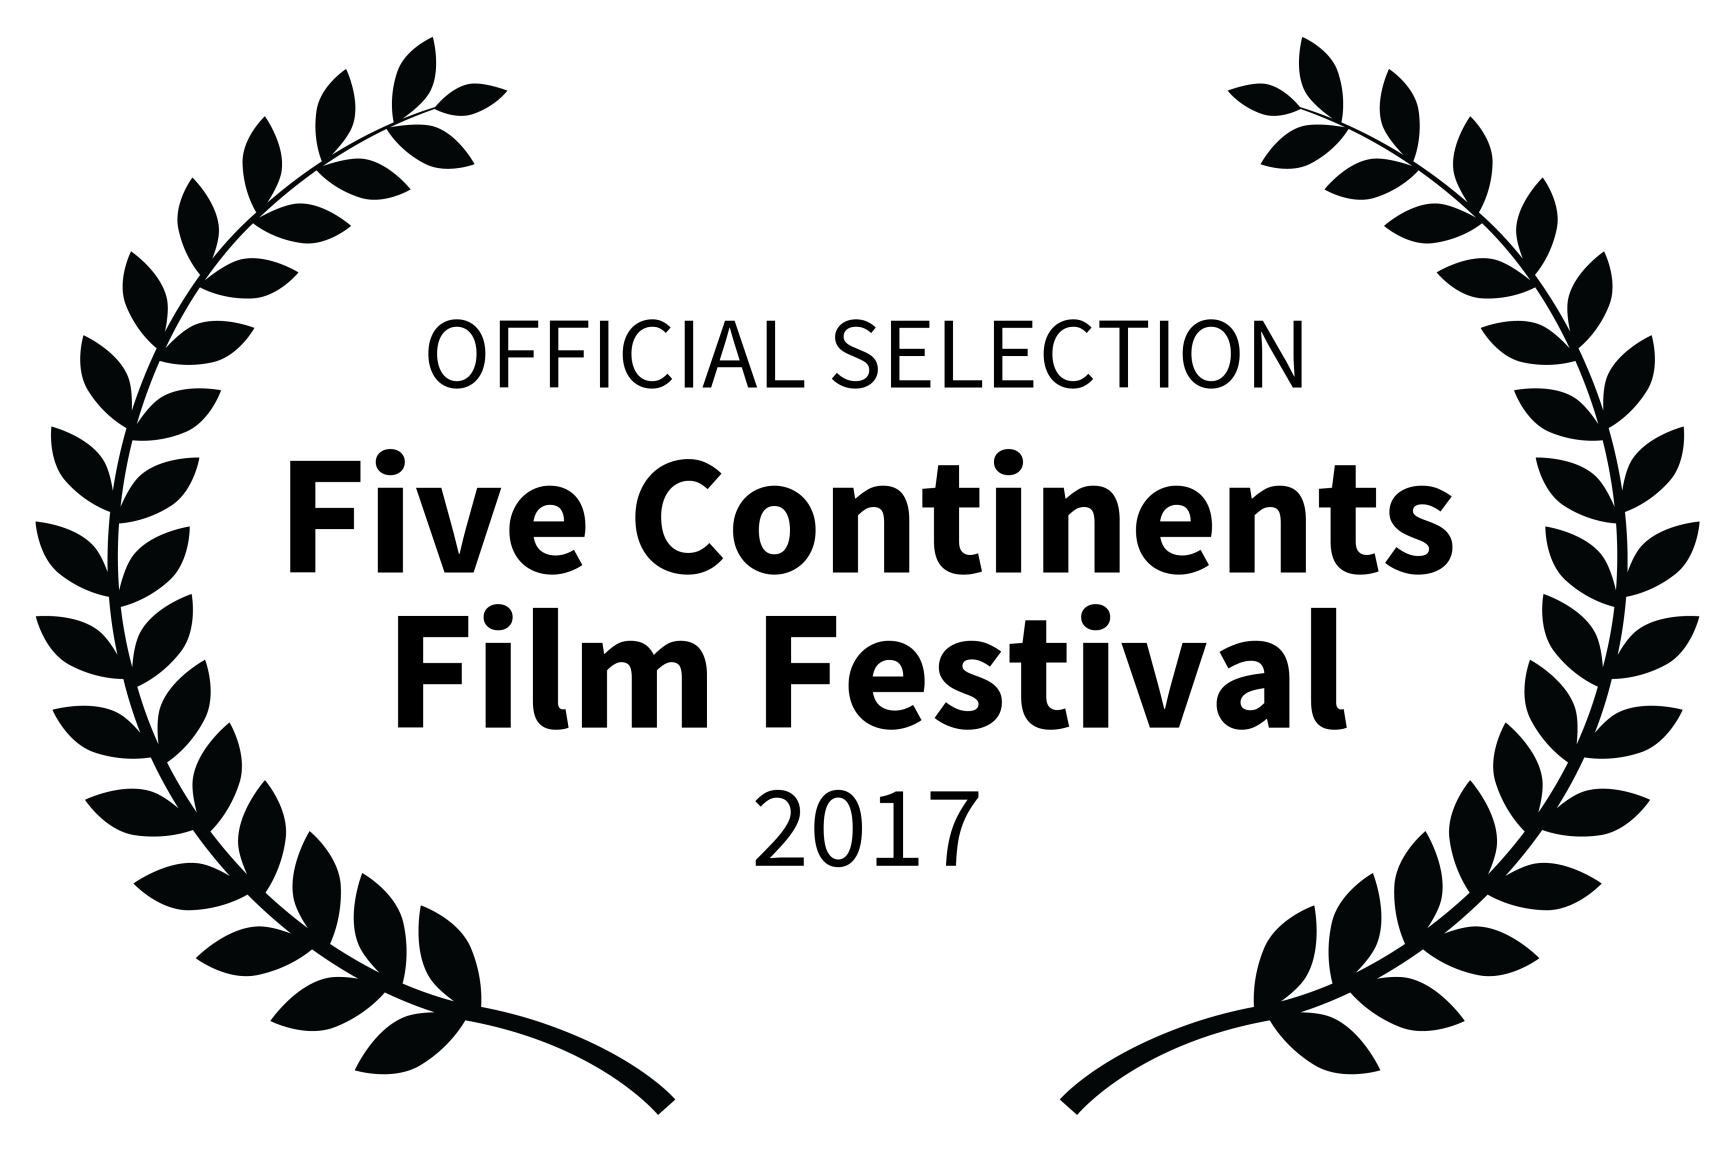 OFFICIAL SELECTION - Five Continents Film Festival - 2017